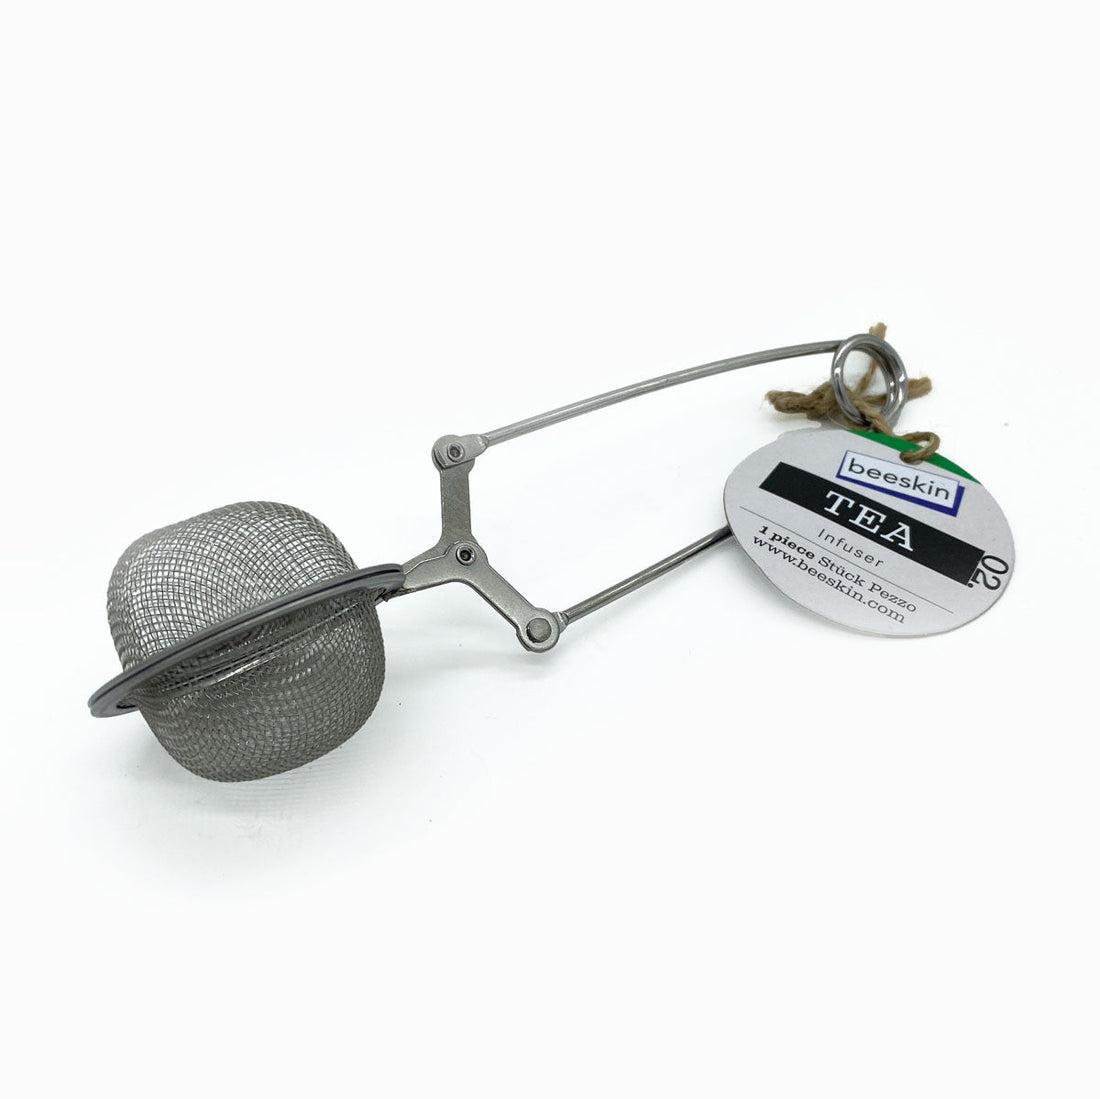 small tea infuser with a hanging tag on white